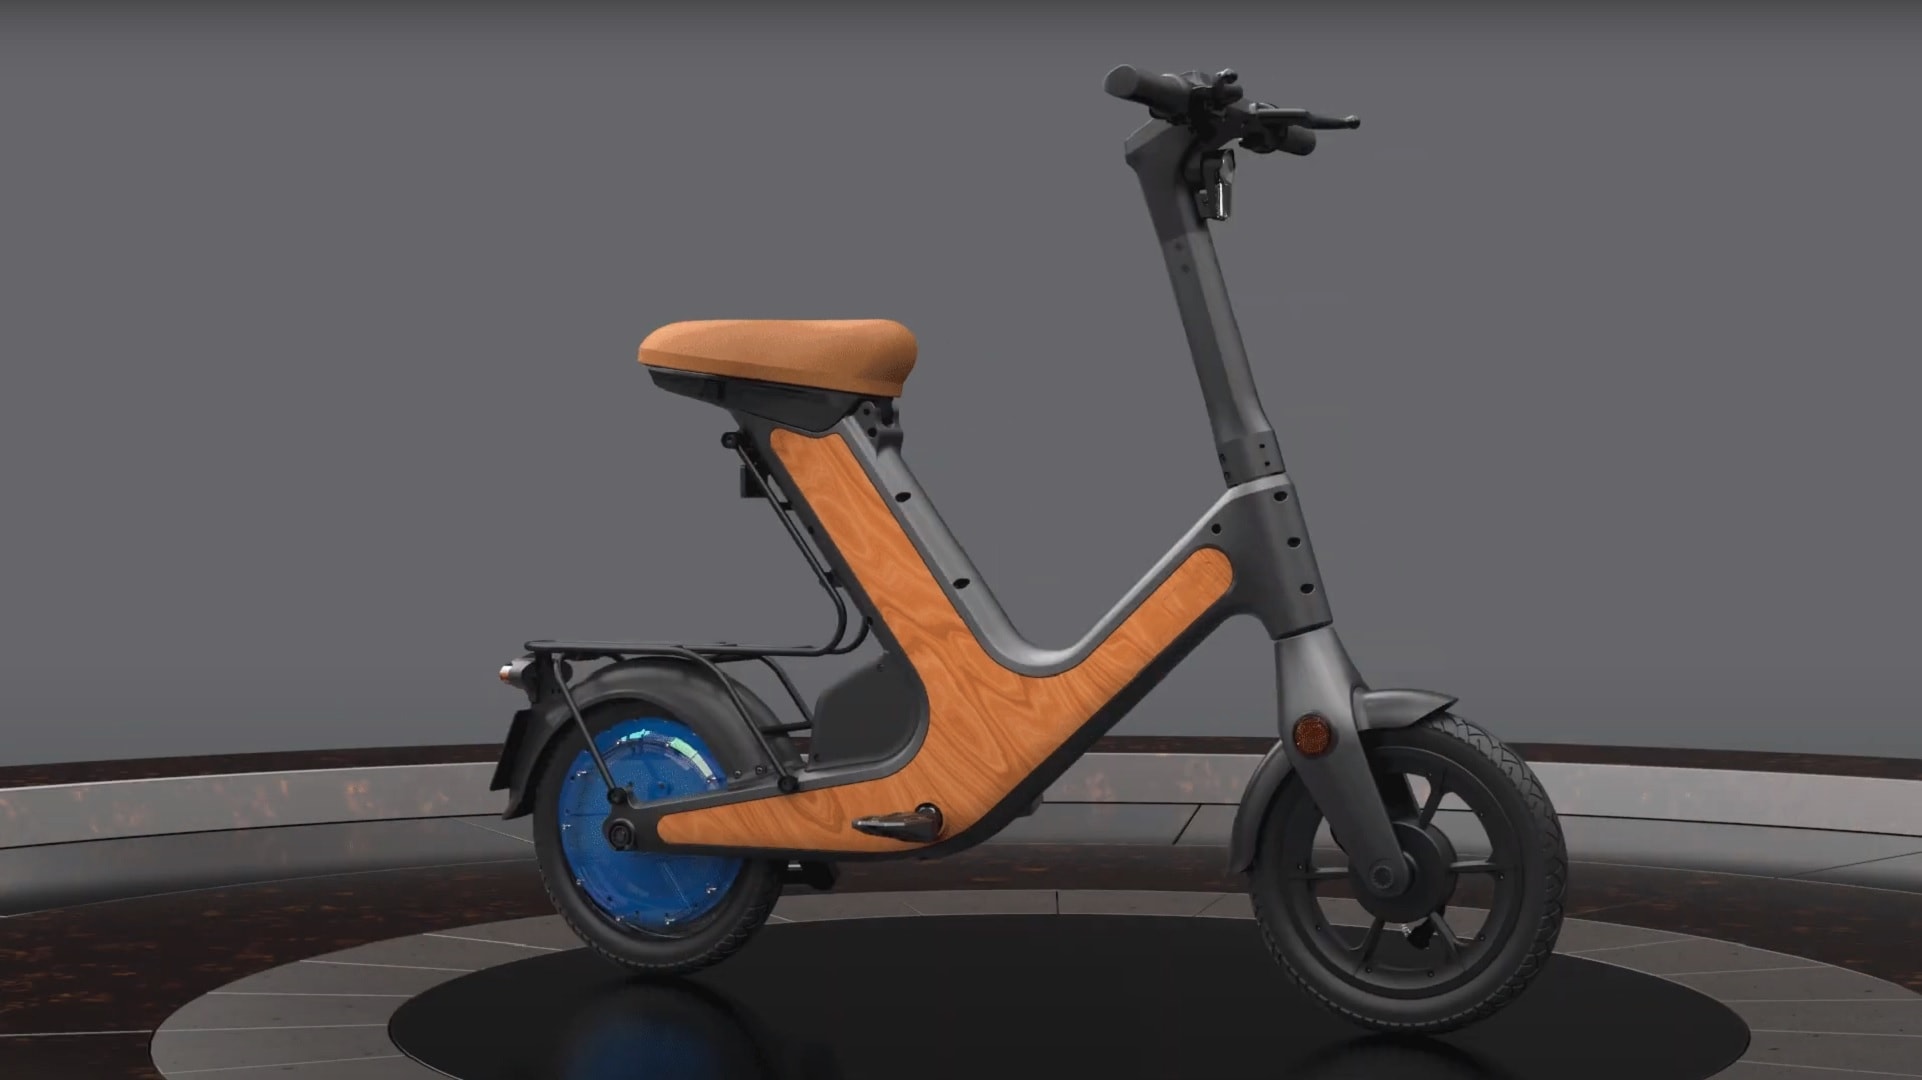 https://s1.cdn.autoevolution.com/images/news/minimalist-looking-e-moped-has-a-magnesium-frame-claims-to-be-the-world-s-lightest-169556_1.jpg